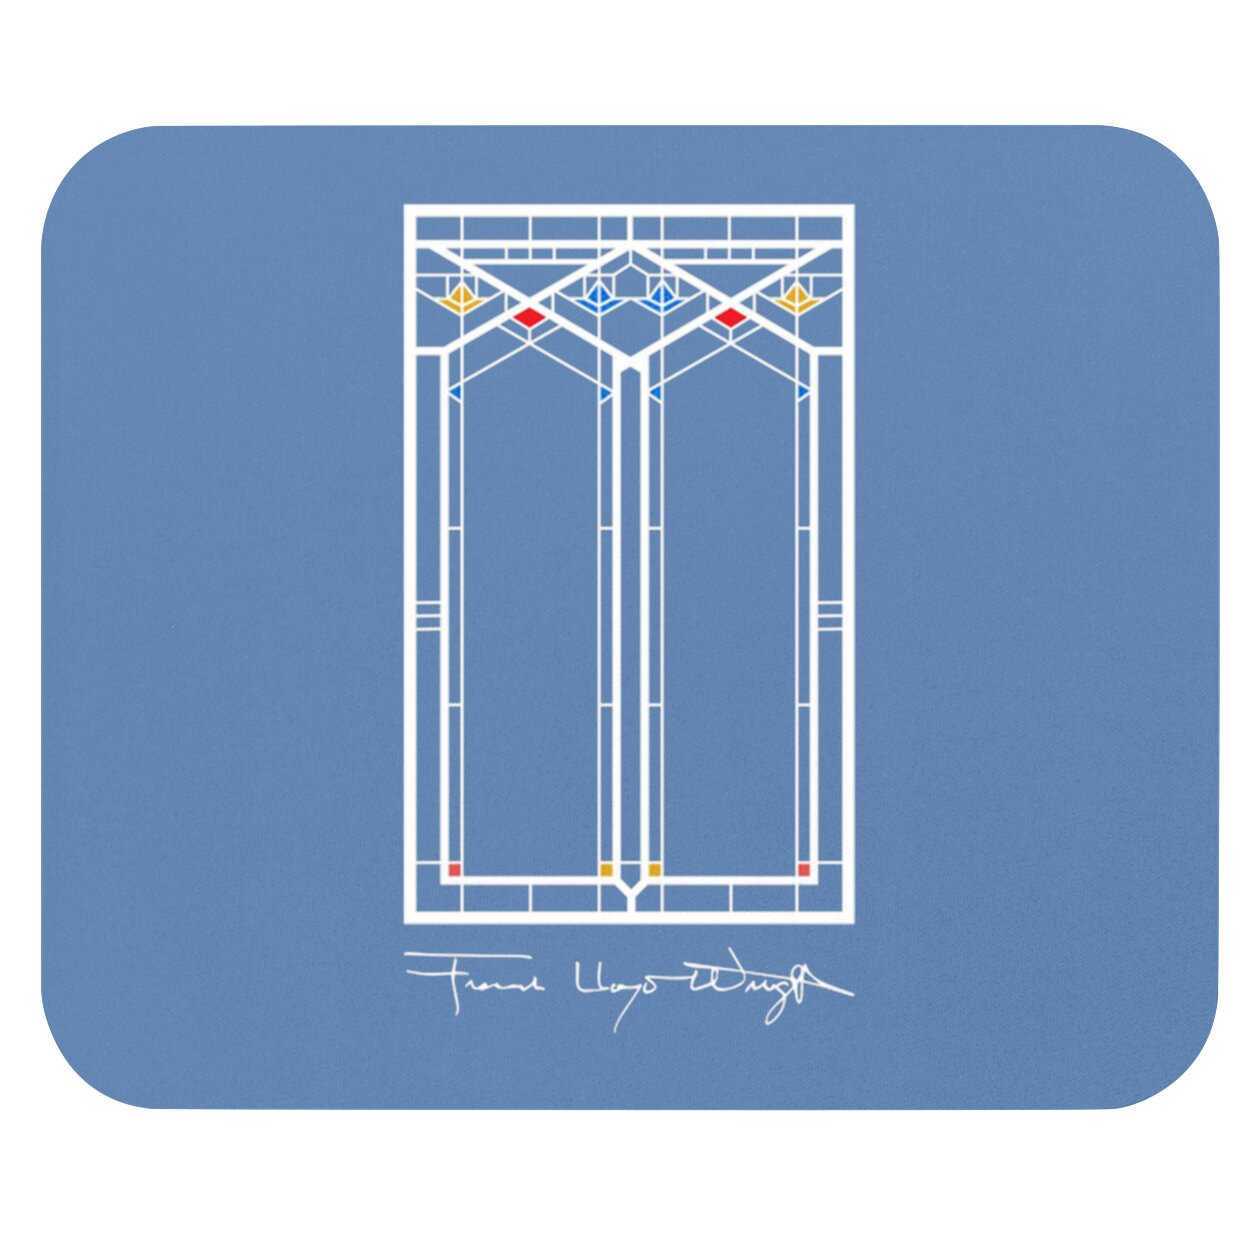 Frank Lloyd Wright - Architecture - Mouse Pads